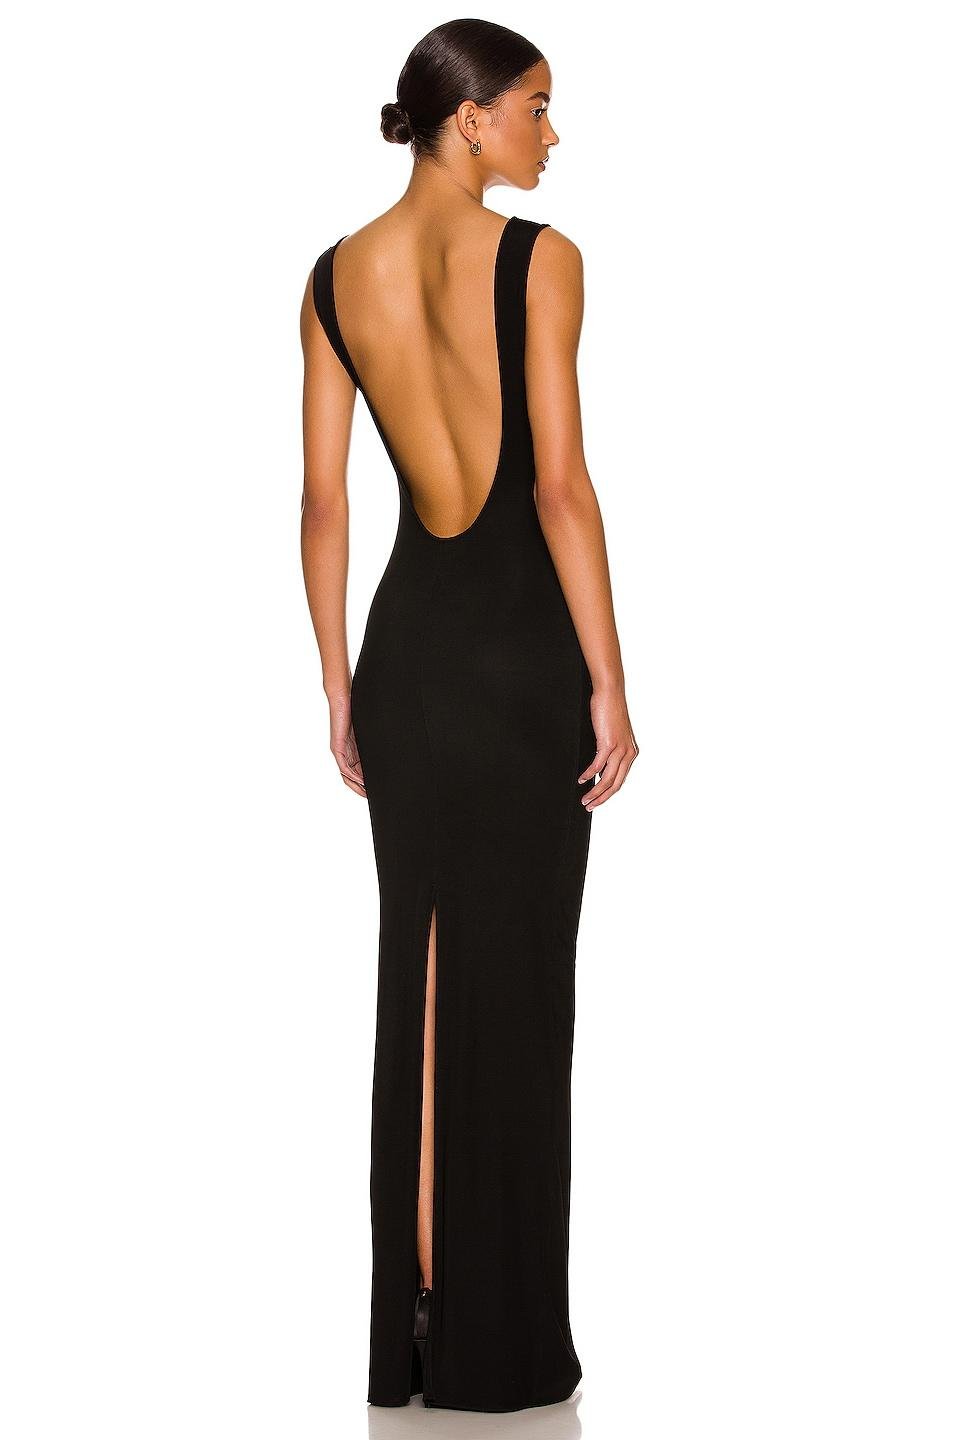 Tom Ford Sleeveless Open Back Gown in Black